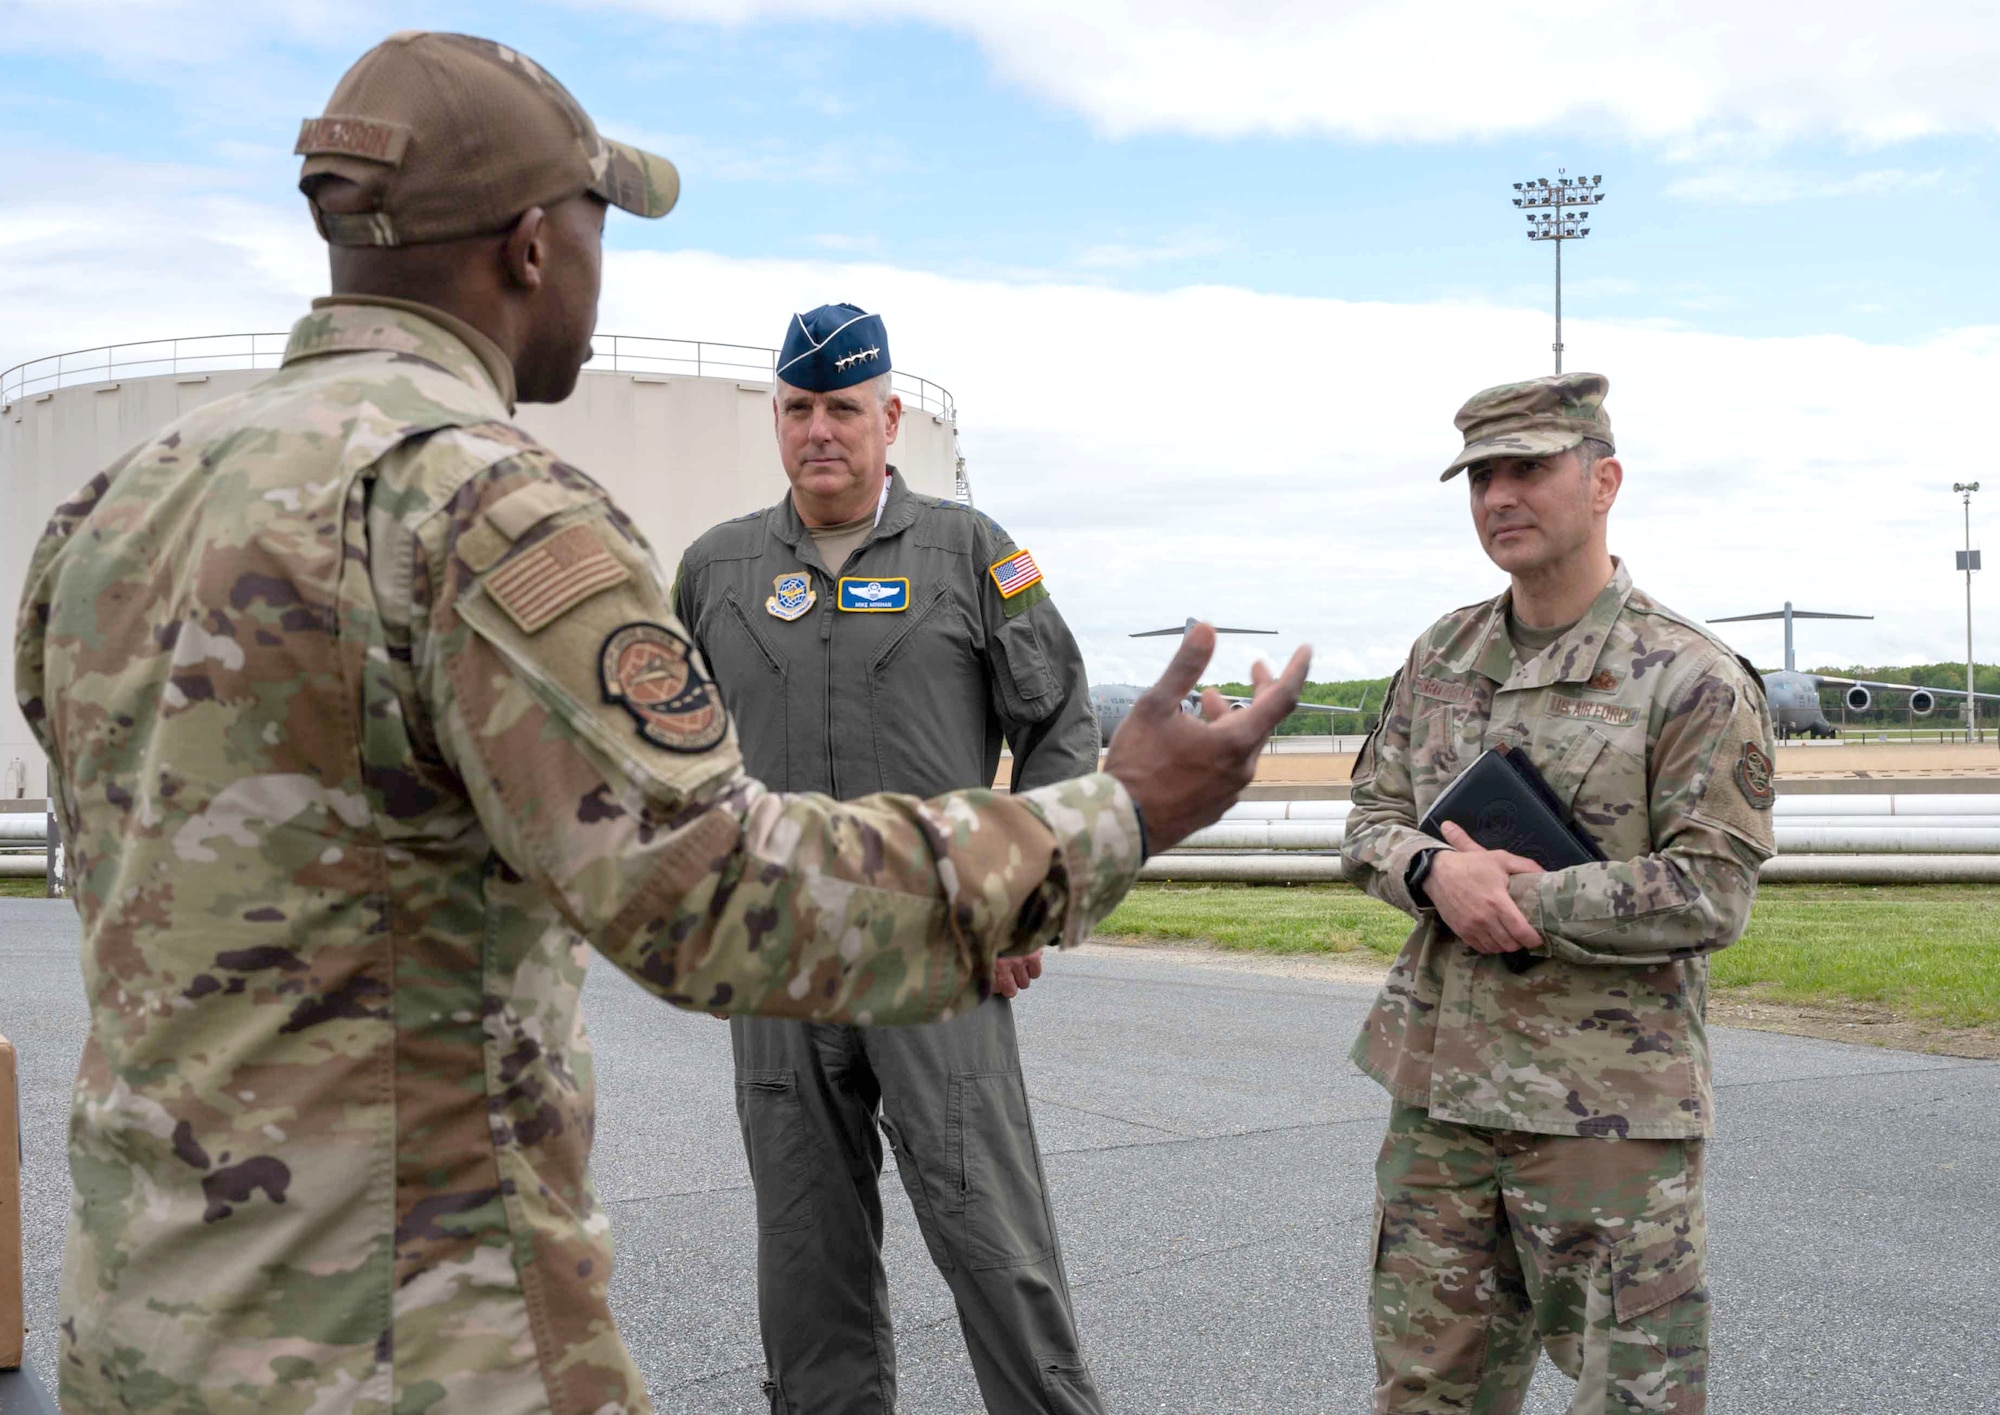 Tech. Sgt. Jamaul Anderson, 436th Logistics Readiness Squadron warehouse operations noncommissioned officer in charge, briefs Gen. Mike Minihan, center, Air Mobility Command commander, and Chief Master Sgt. Brian Kruzelnick, right, AMC command chief, at Dover Air Force Base, Delaware, May 5, 2022. During their visit, AMC leadership highlighted top performing Airmen and toured base facilities such as the C-5 isochronal dock, the air traffic control tower and the Tactics and Leadership Nexus. (U.S. Air Force photo by Senior Airman Faith Schaefer)